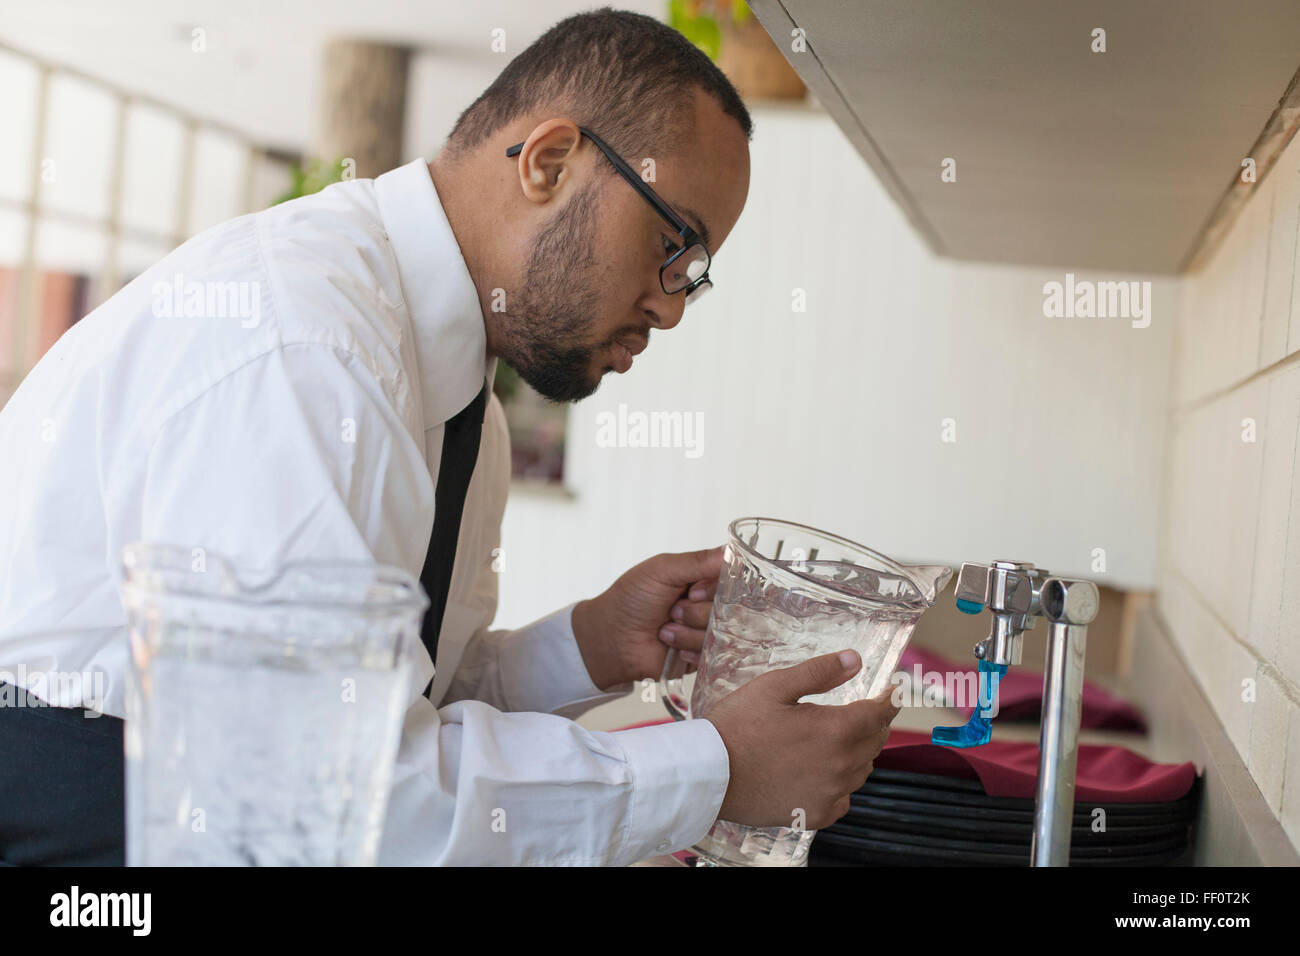 Mixed race server with down syndrome filling pitcher in restaurant Stock Photo